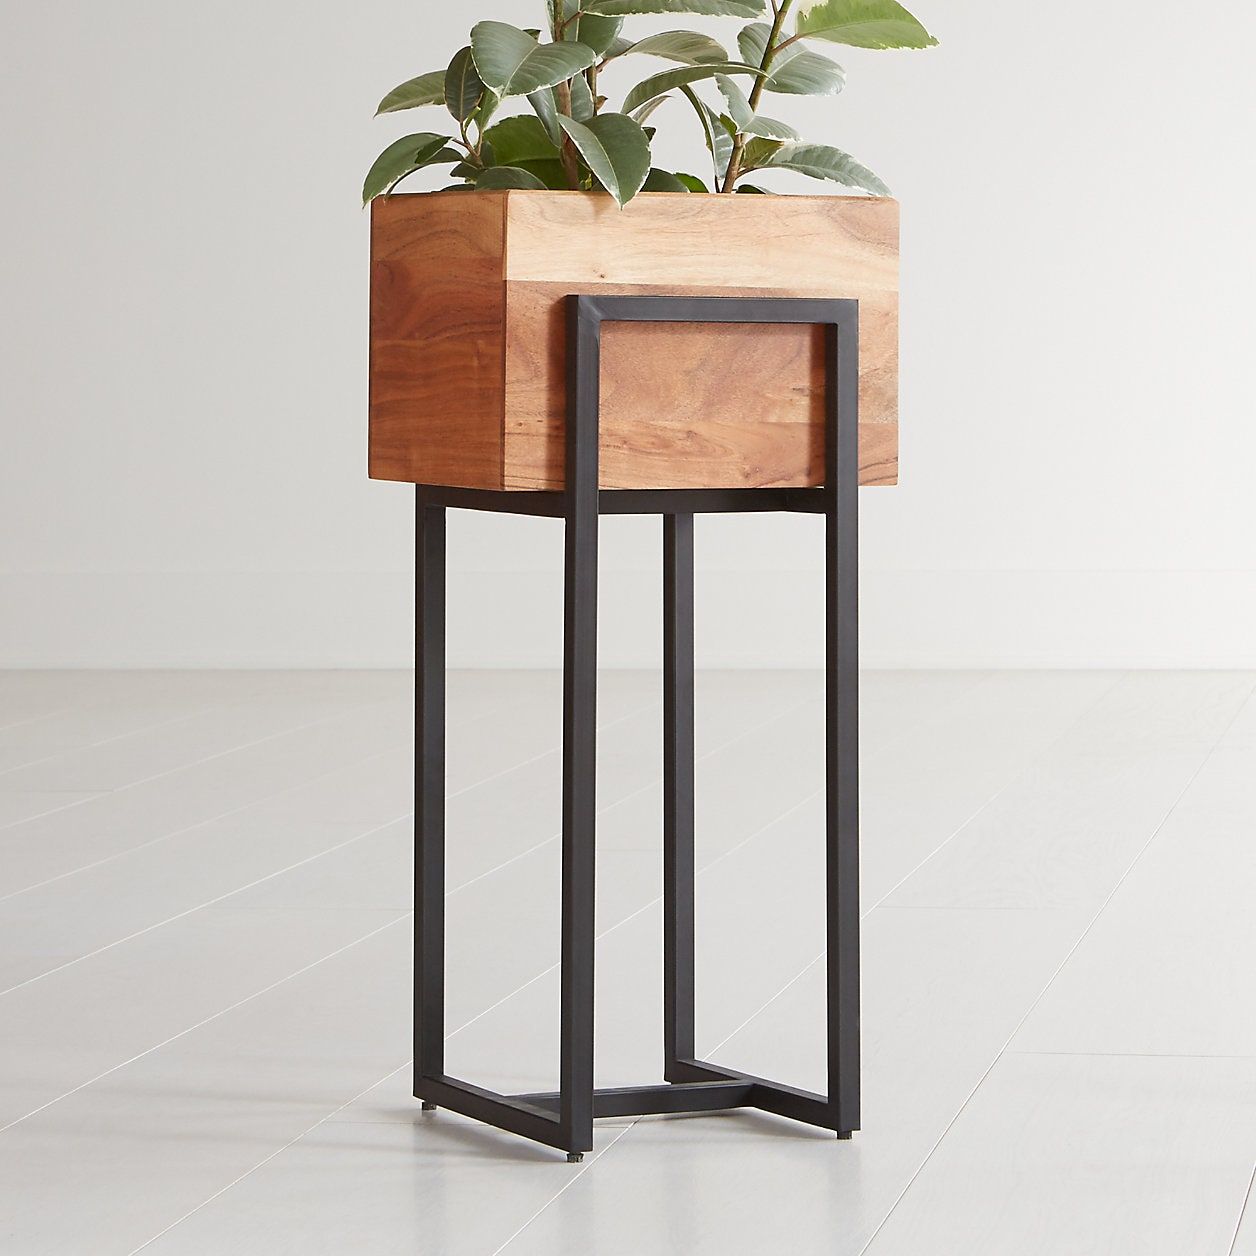 15 Best Indoor Plant Stands That Seriously Stand Out | Architectural Digest With Regard To Modern Plant Stands (View 10 of 15)